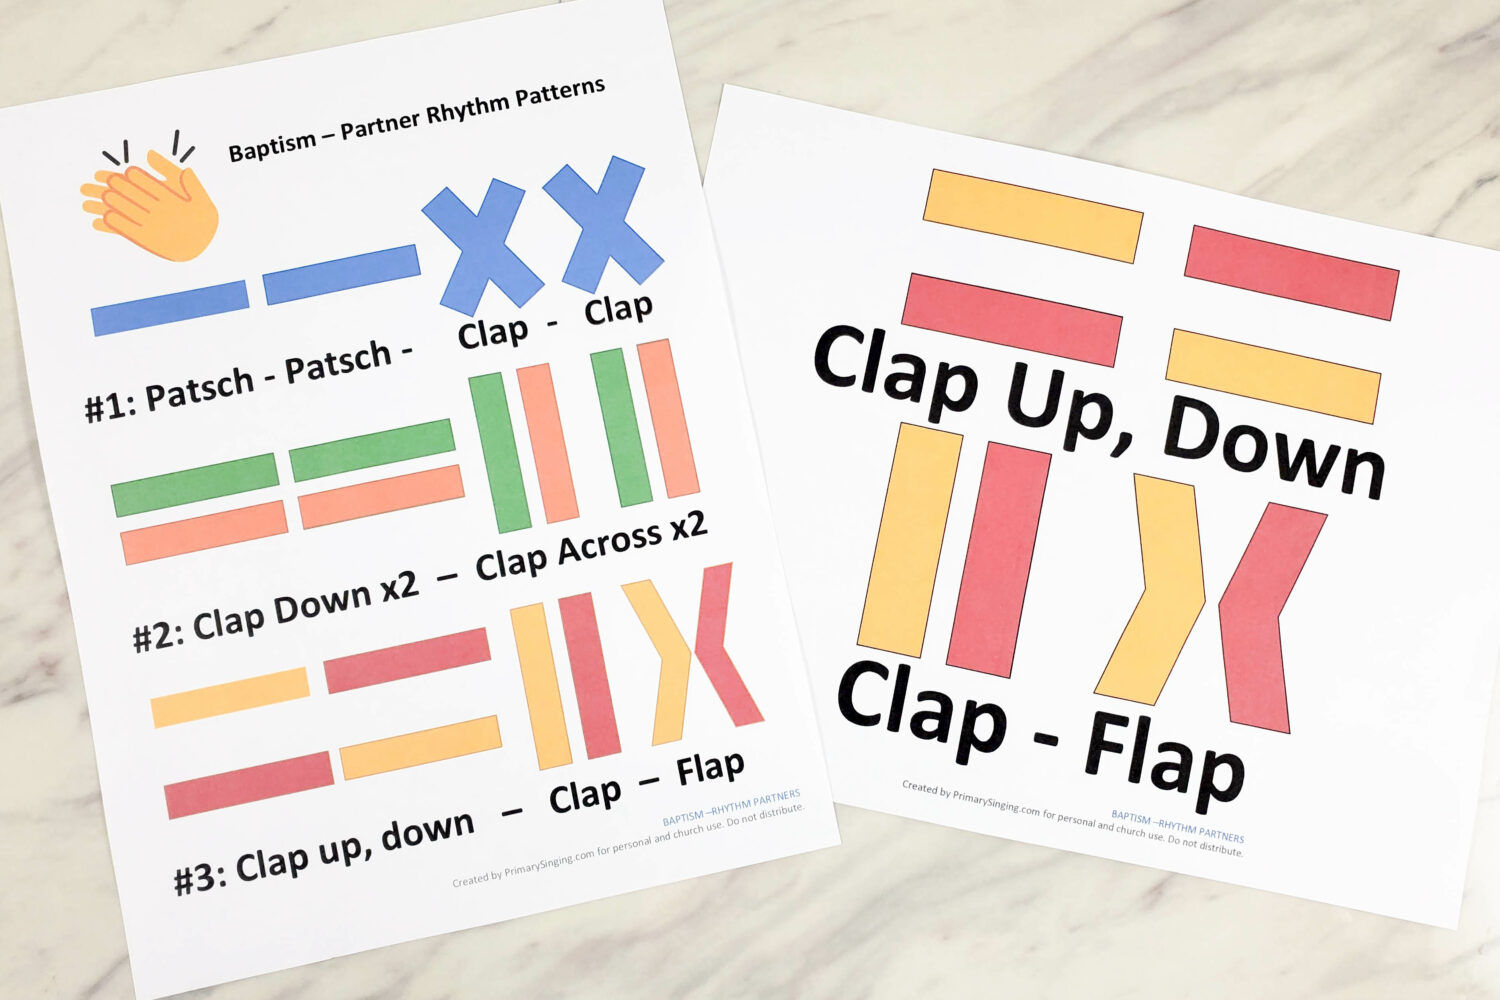 LDS Baptism Song - Body Rhythm Partners patterns free printable lesson plan for Primary Singing Time! Easy idea to teach Baptism song.